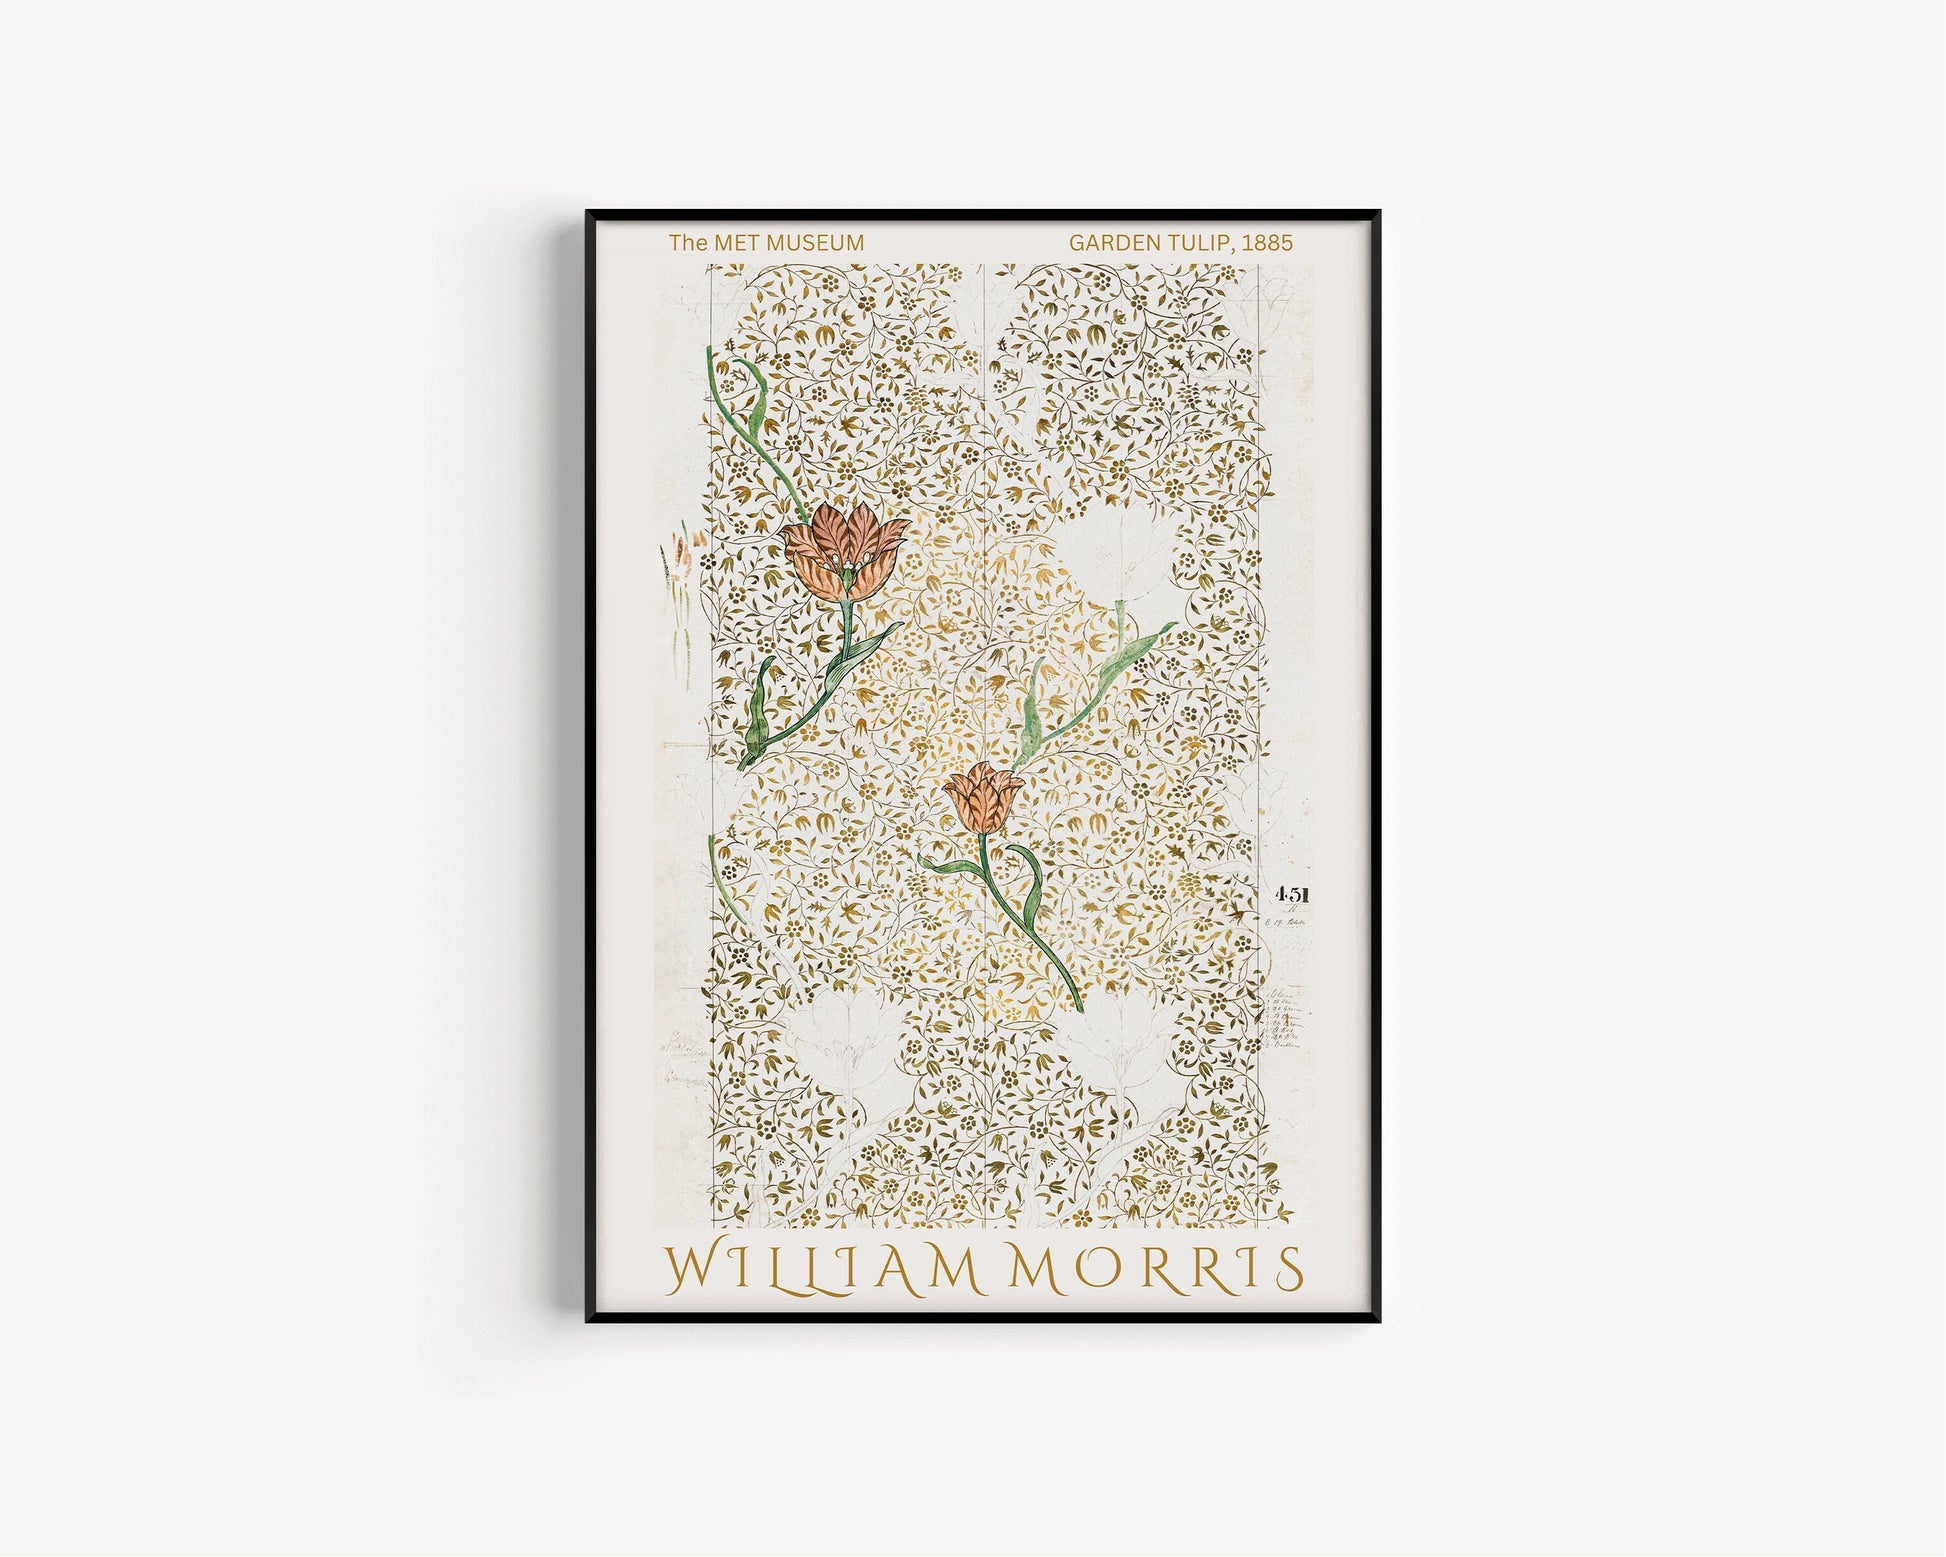 Framed Gold William Morris Poster Exhibition Poster Art Print Nouveau Flower Pattern Museum Market Framed Ready to Hang Home office Decor